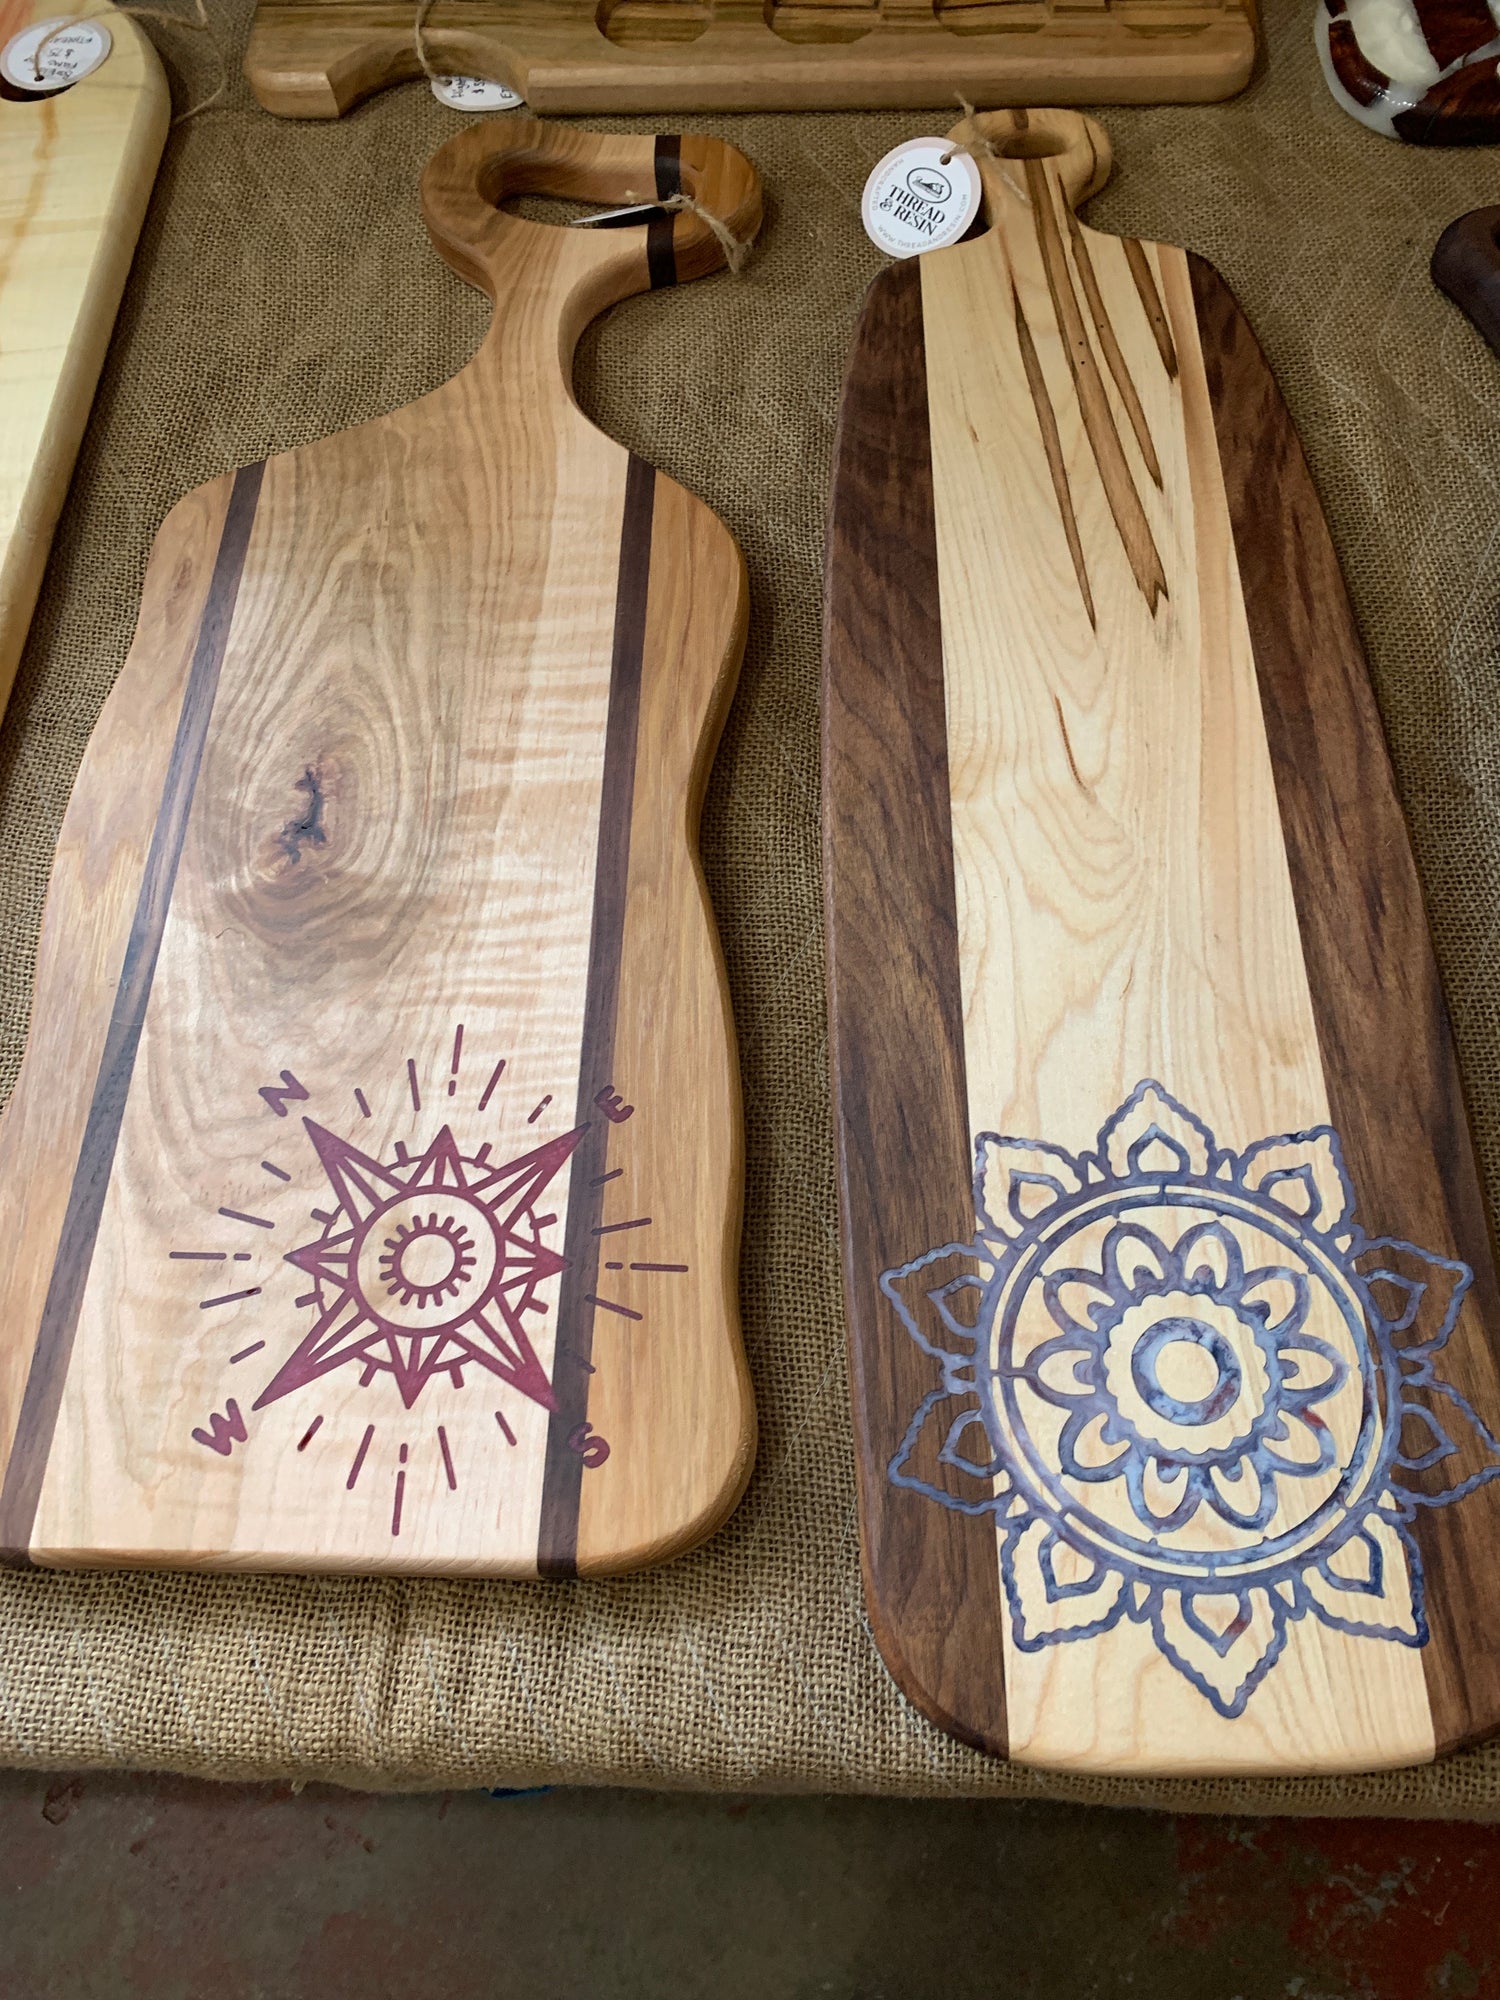 Serving boards and trays